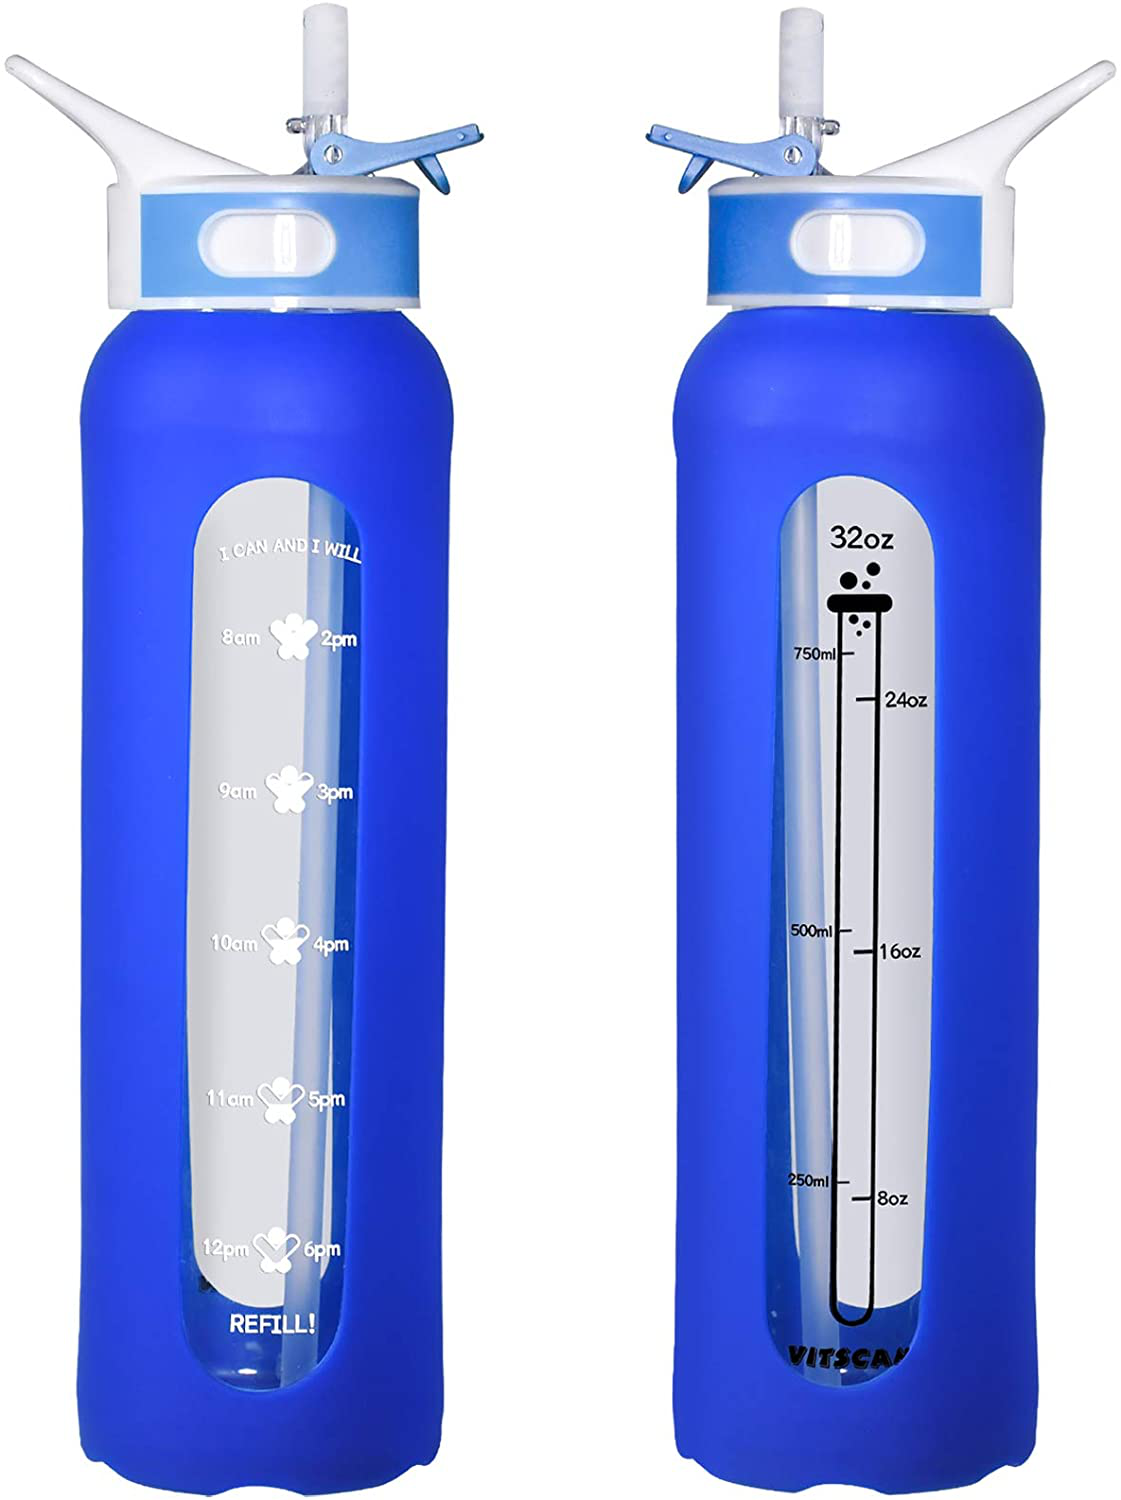 Glass Water Bottle with 32 OZ Straw & Wide Mouth & Black Silicone Sleeve, Large 1L Glass Water Bottle with Time Marker, 100% Leakproof Straw Lid BPA Free Borosilicate Glass